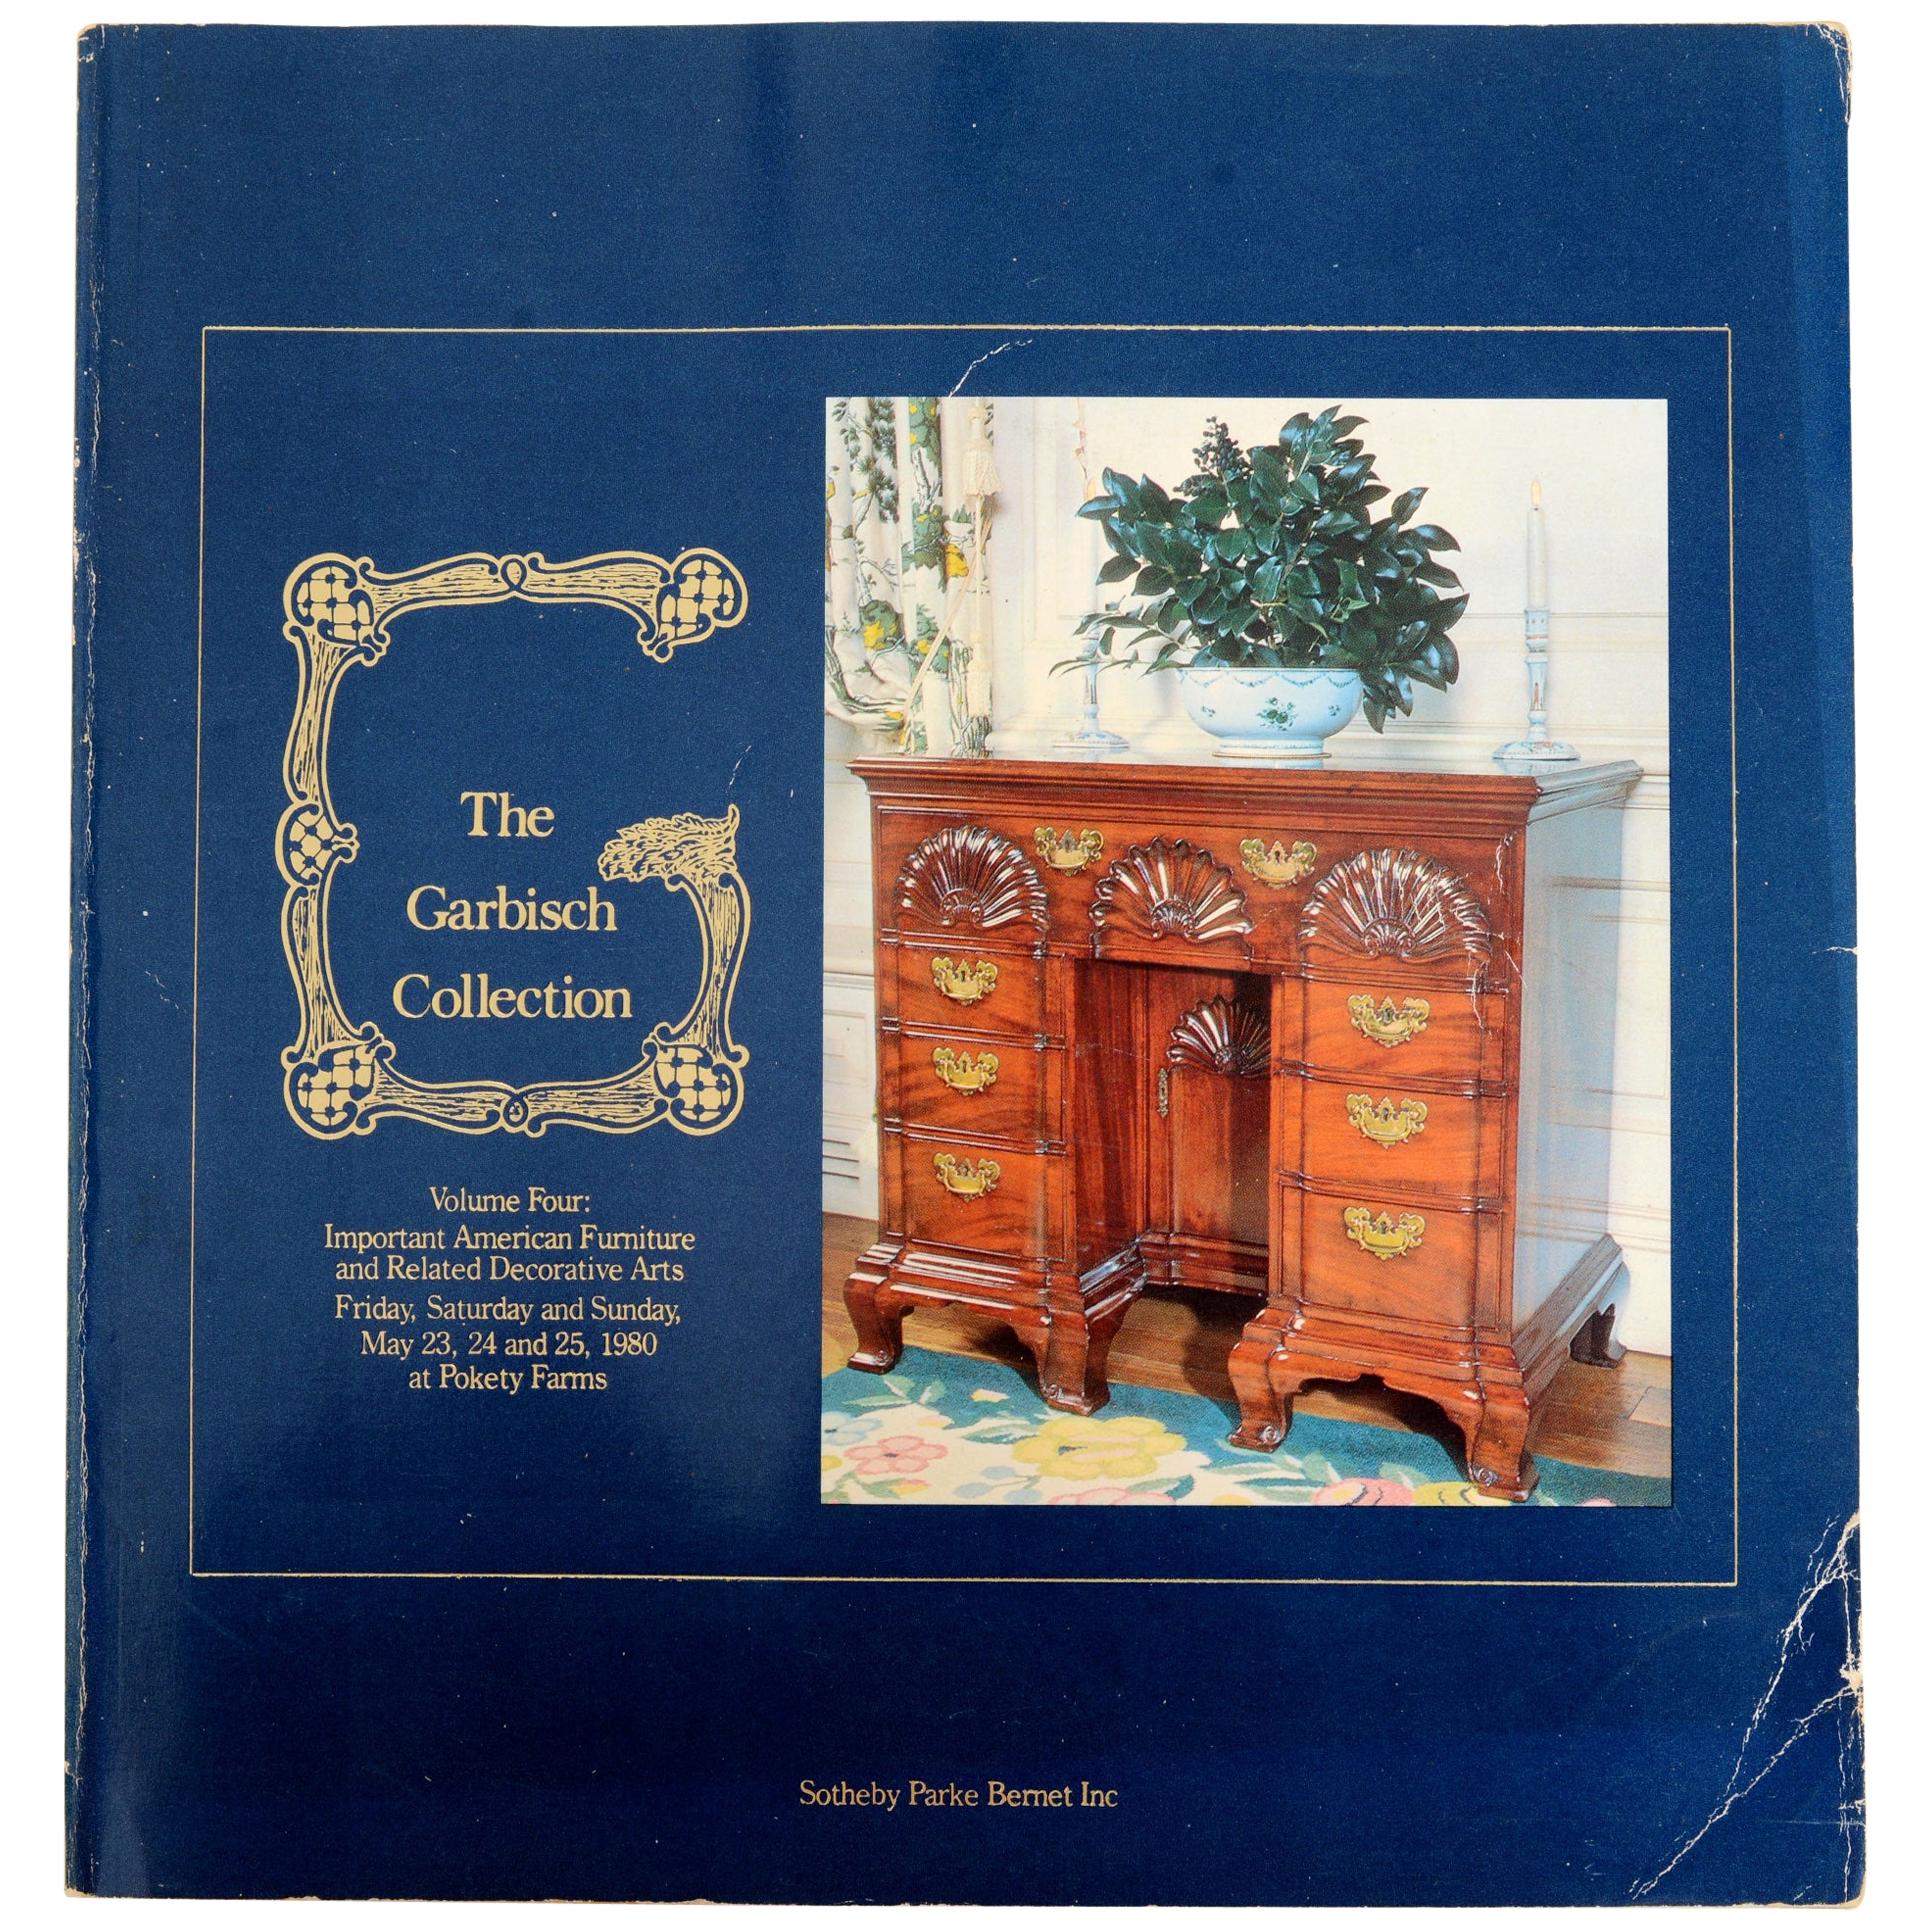 Sotheby's: The Garbisch Collection, Volume Four, First Edition